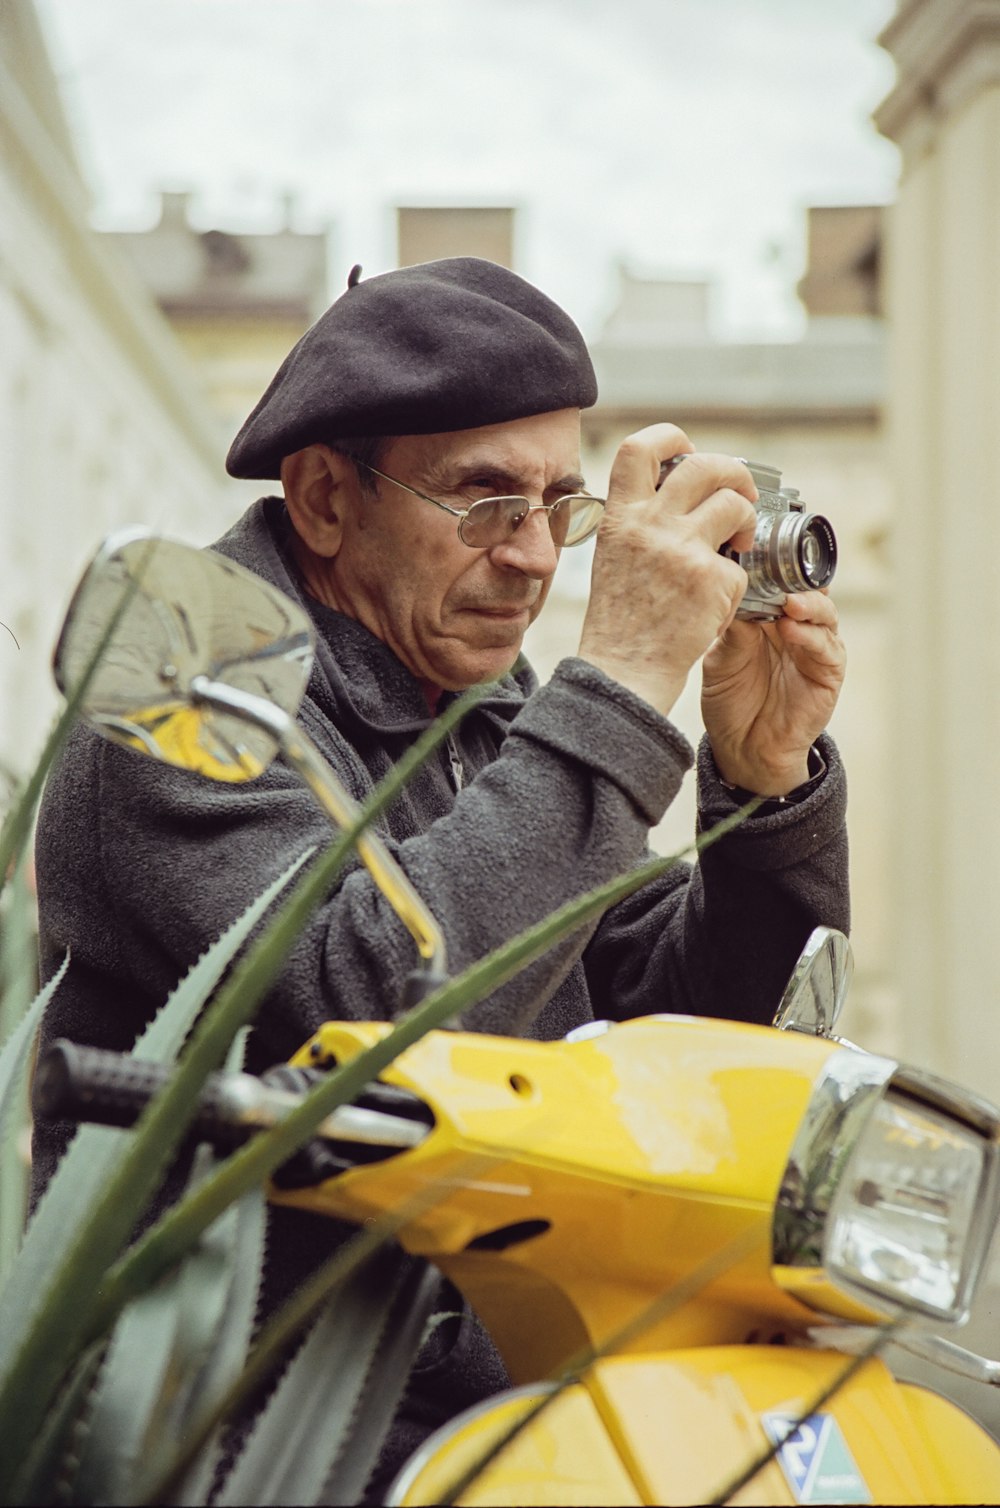 a man sitting on a yellow scooter taking a picture